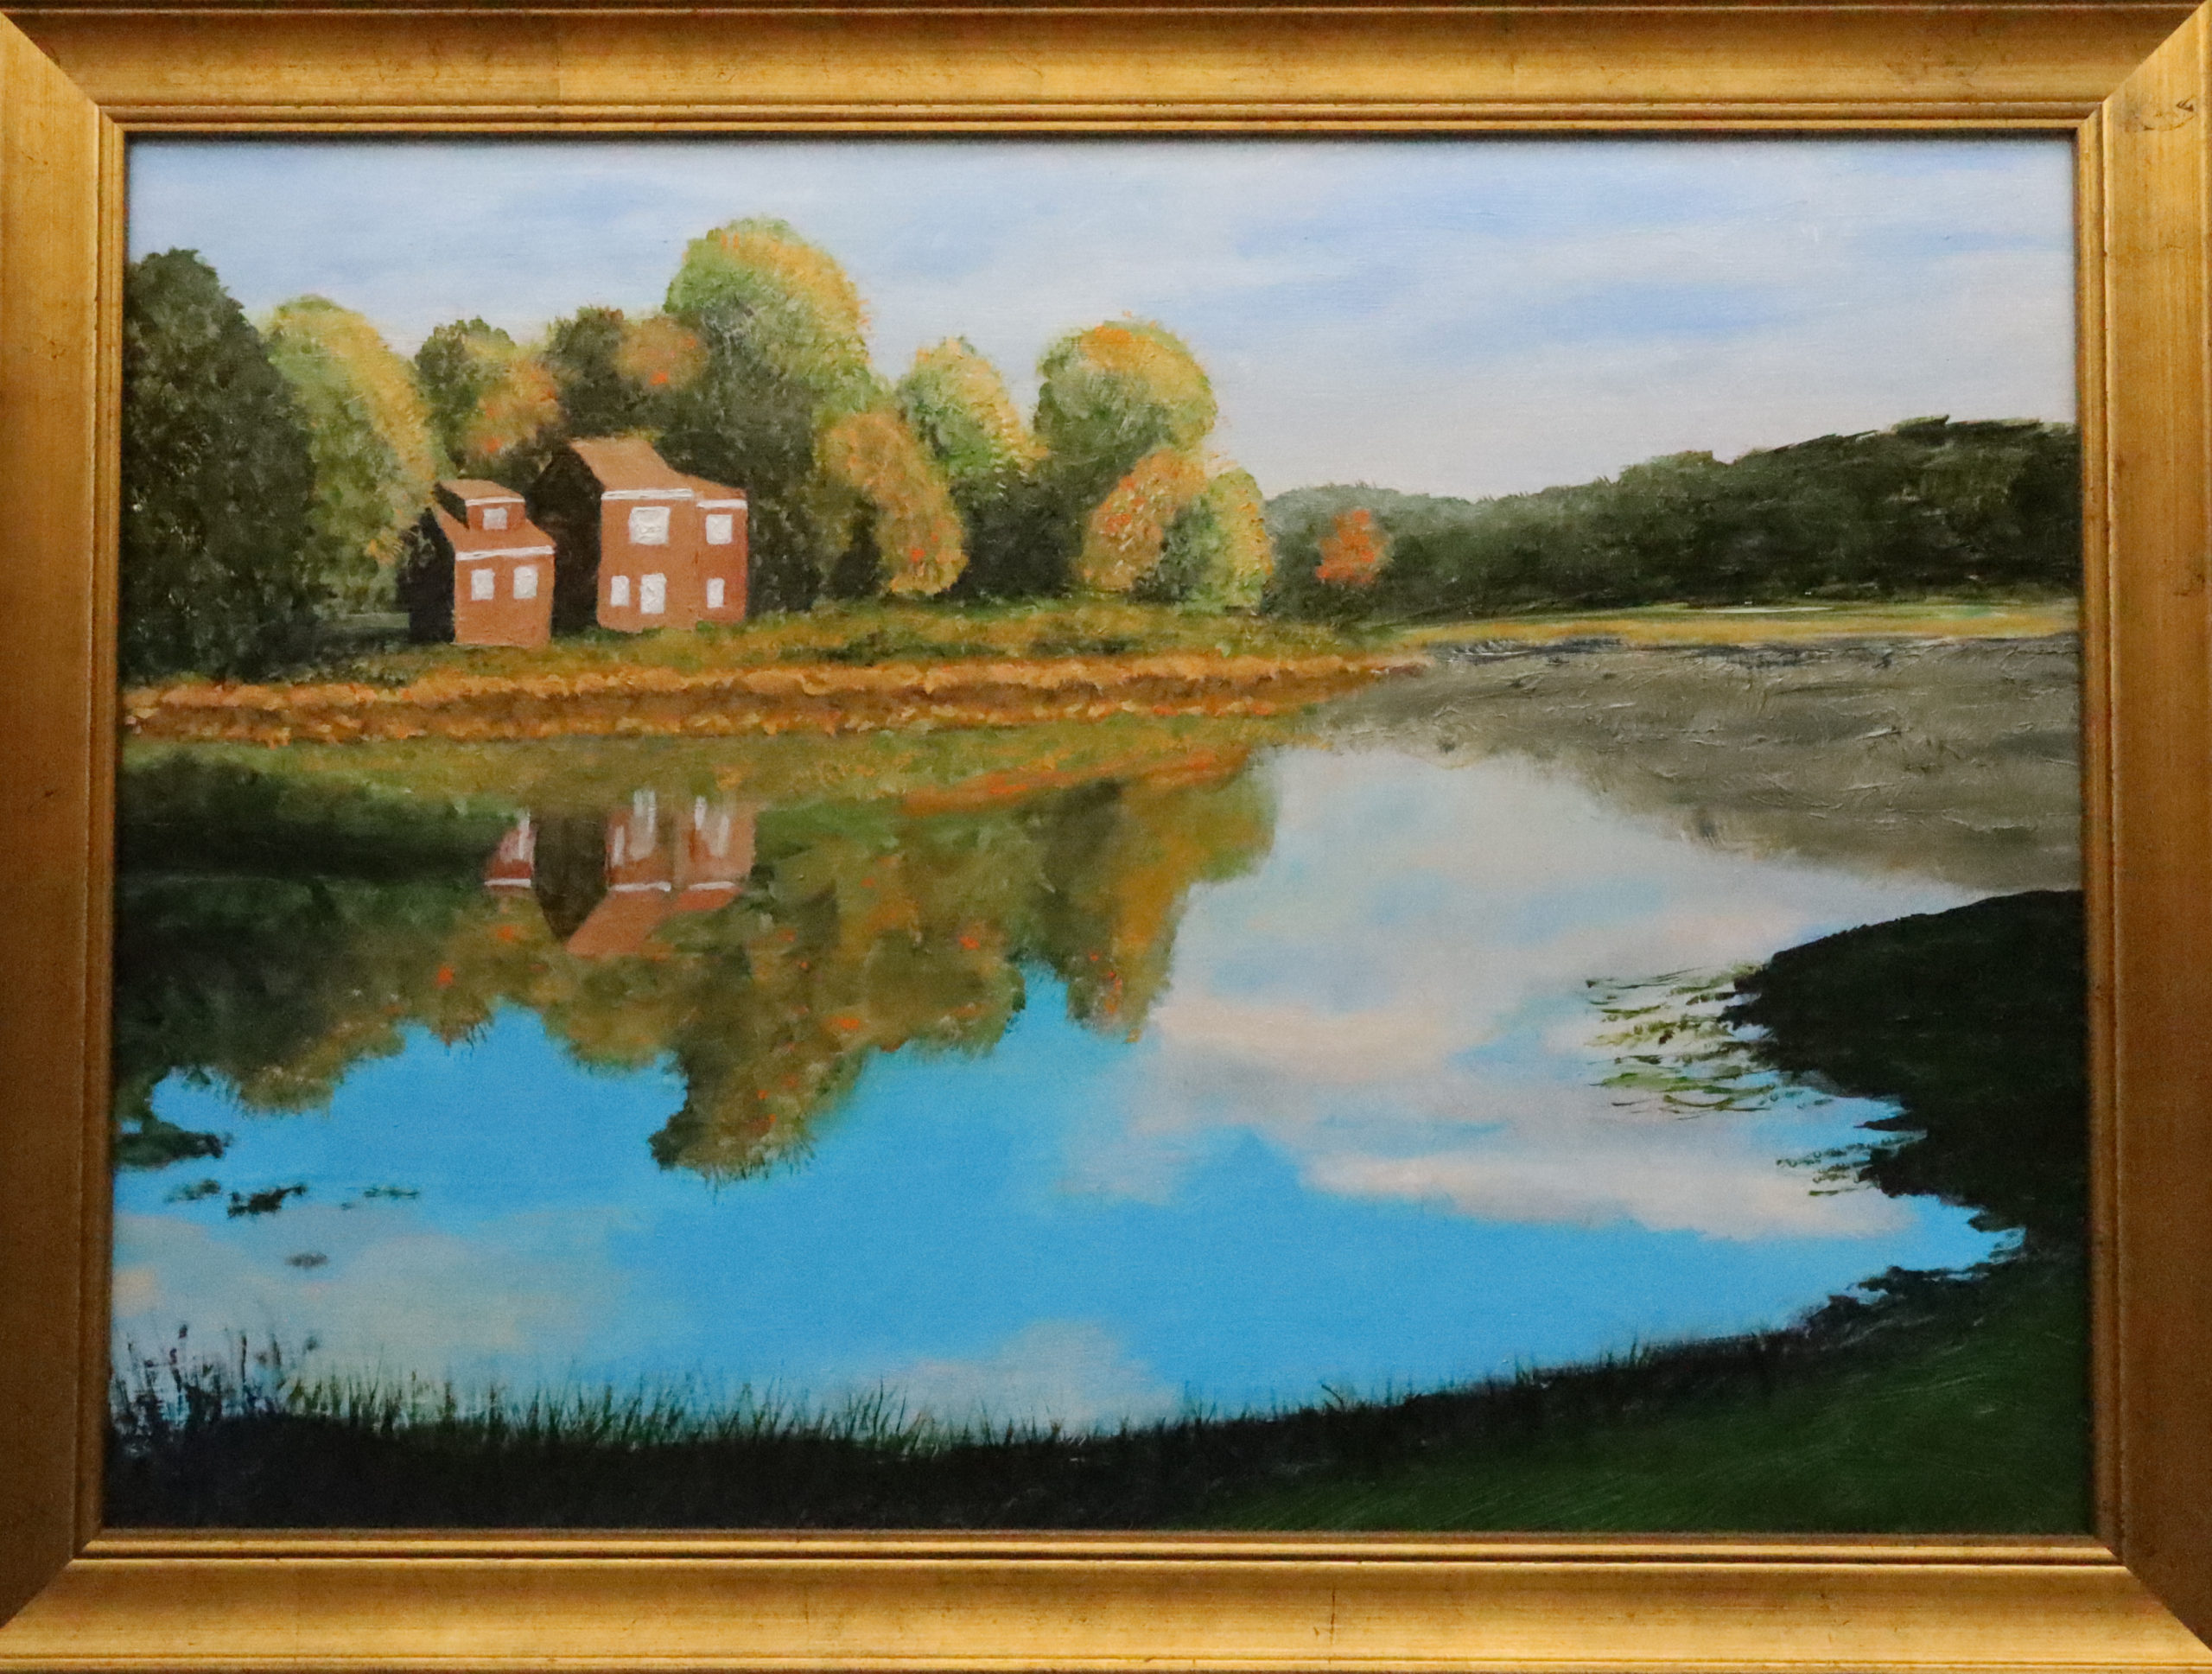 Painting of a quiet Reflection